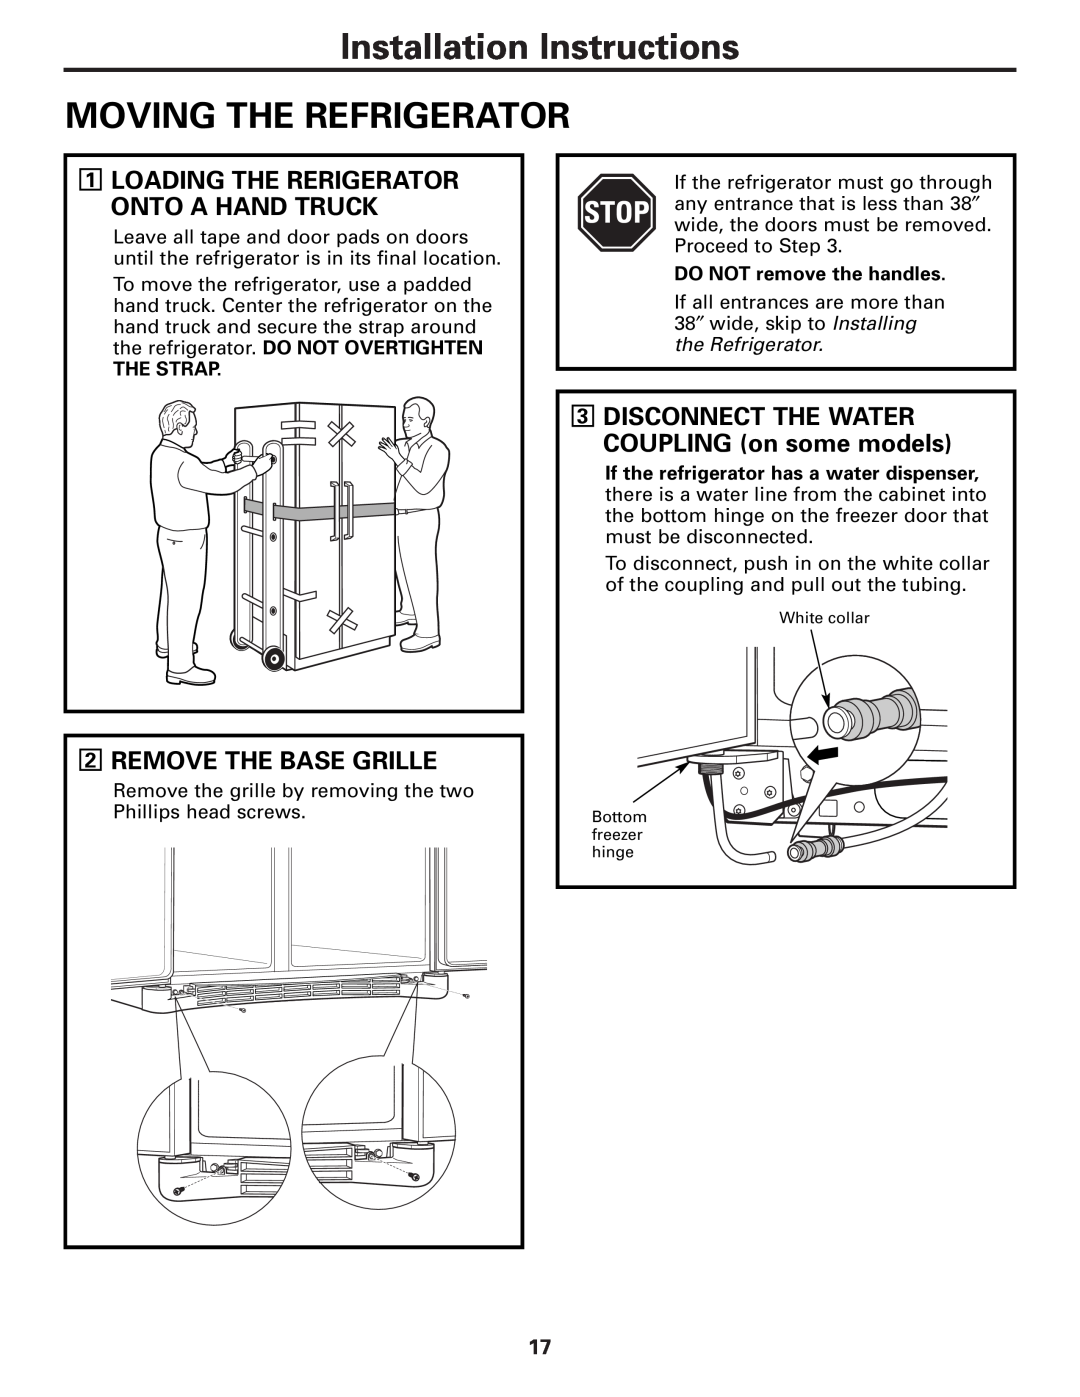 GE 25 and 27 Installation Instructions MOVING THE REFRIGERATOR, 2REMOVE THE BASE GRILLE, The Strap 